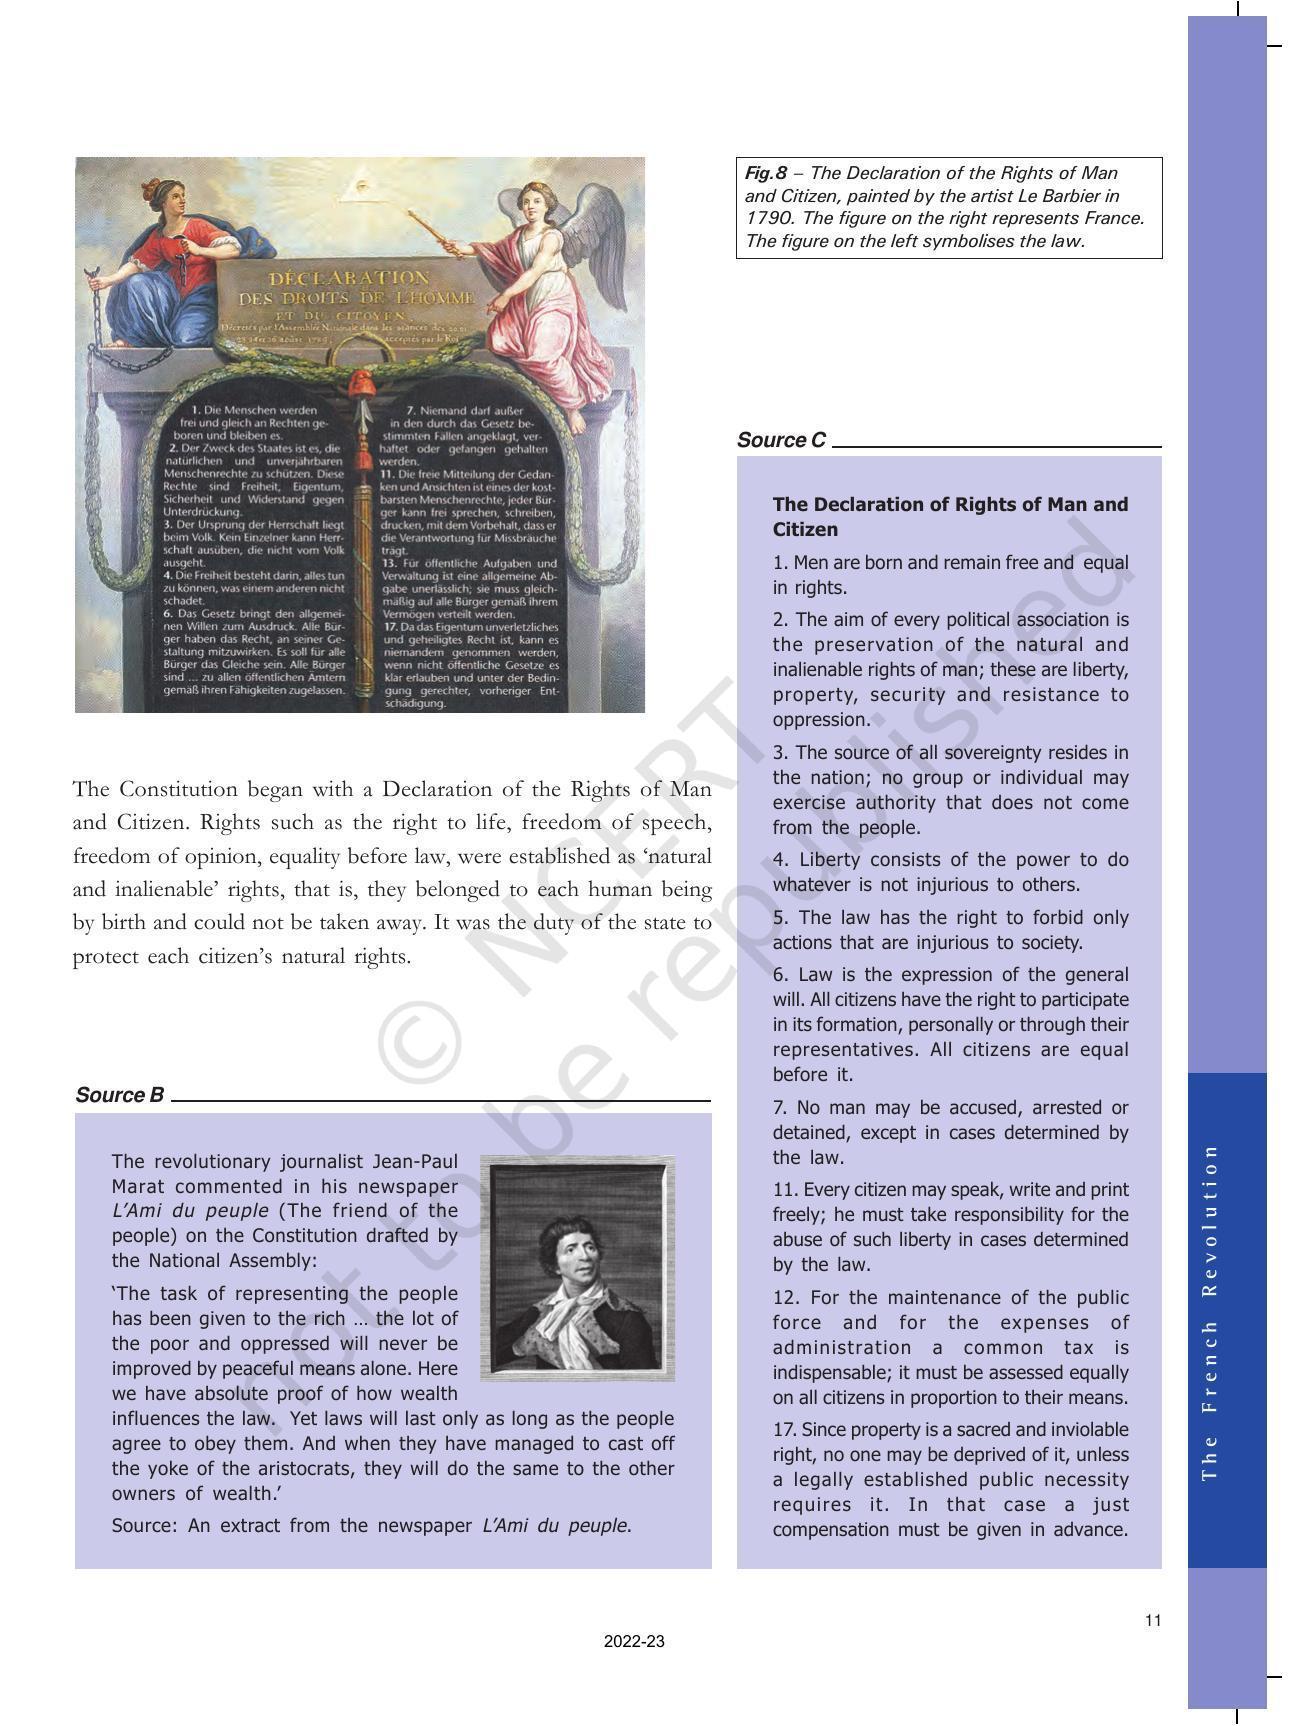 NCERT Book for Class 9 History Chapter 1 The French Revolution - Page 11